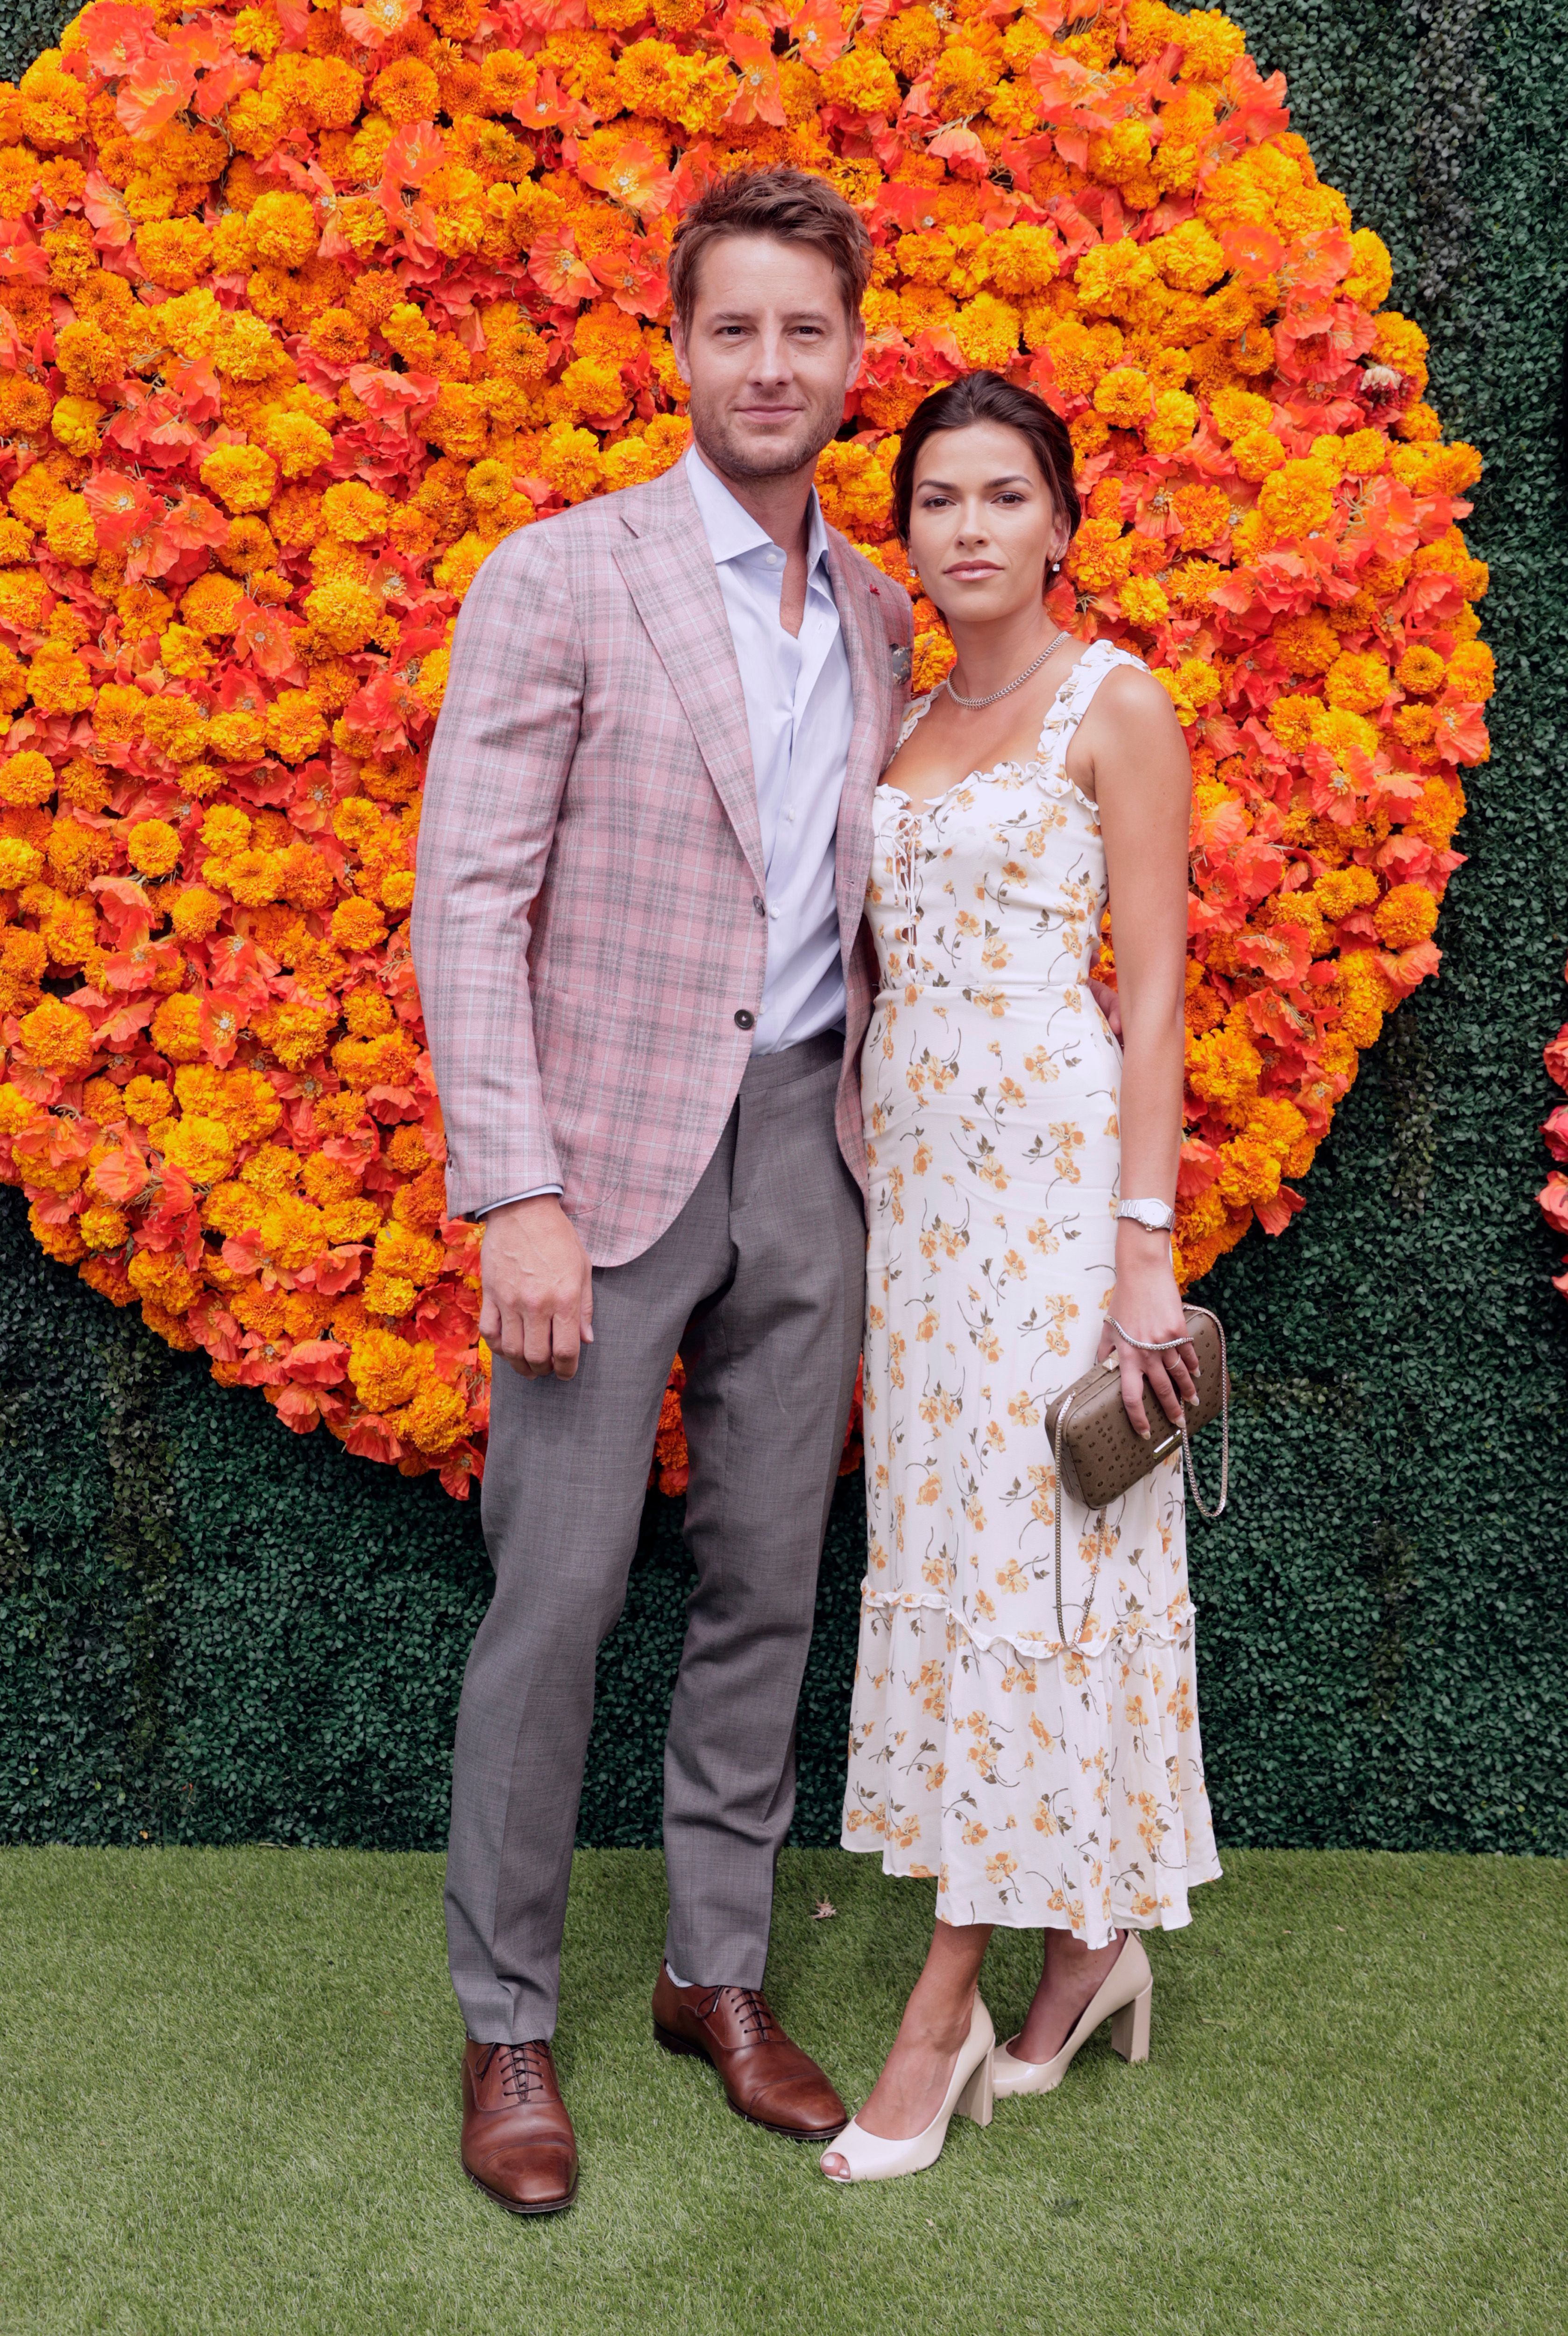 Justin Hartley and Sofia Pernas at the Veuve Clicquot Polo Classic event in California, 2021 | Photo: Getty Images 